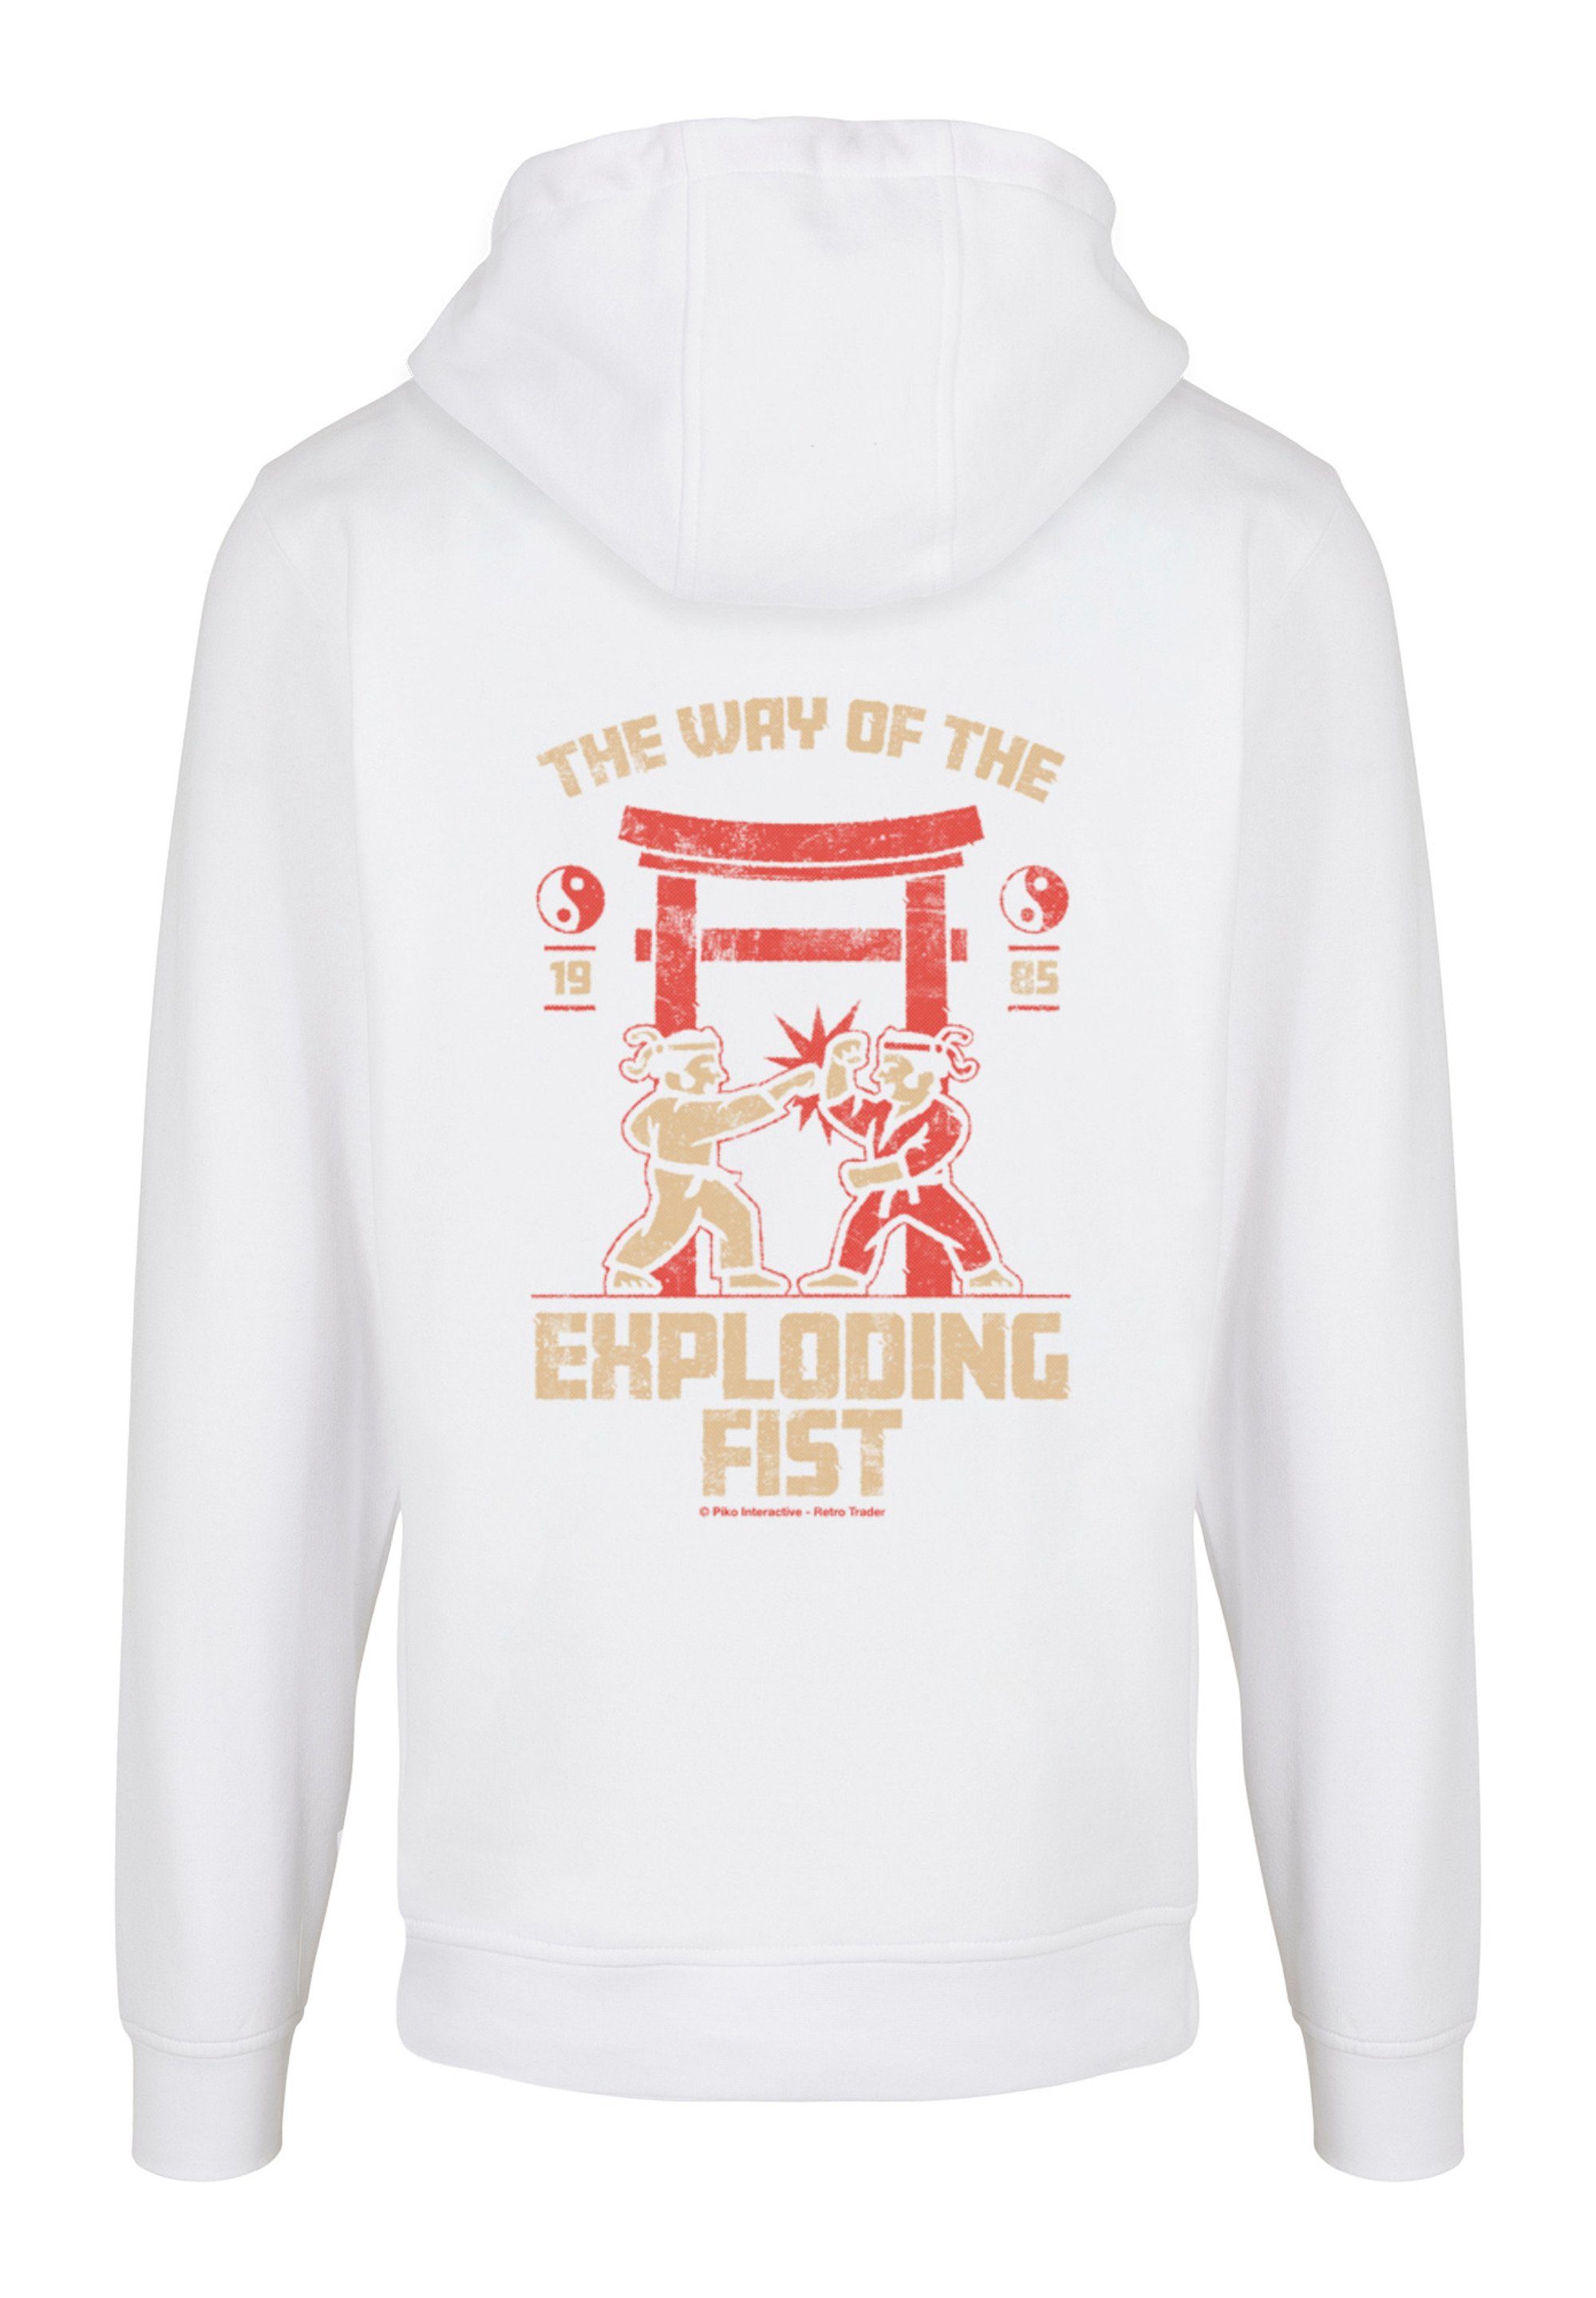 F4NT4STIC Kapuzenpullover The Way Retro the Exploding Fist Print Gaming weiß of